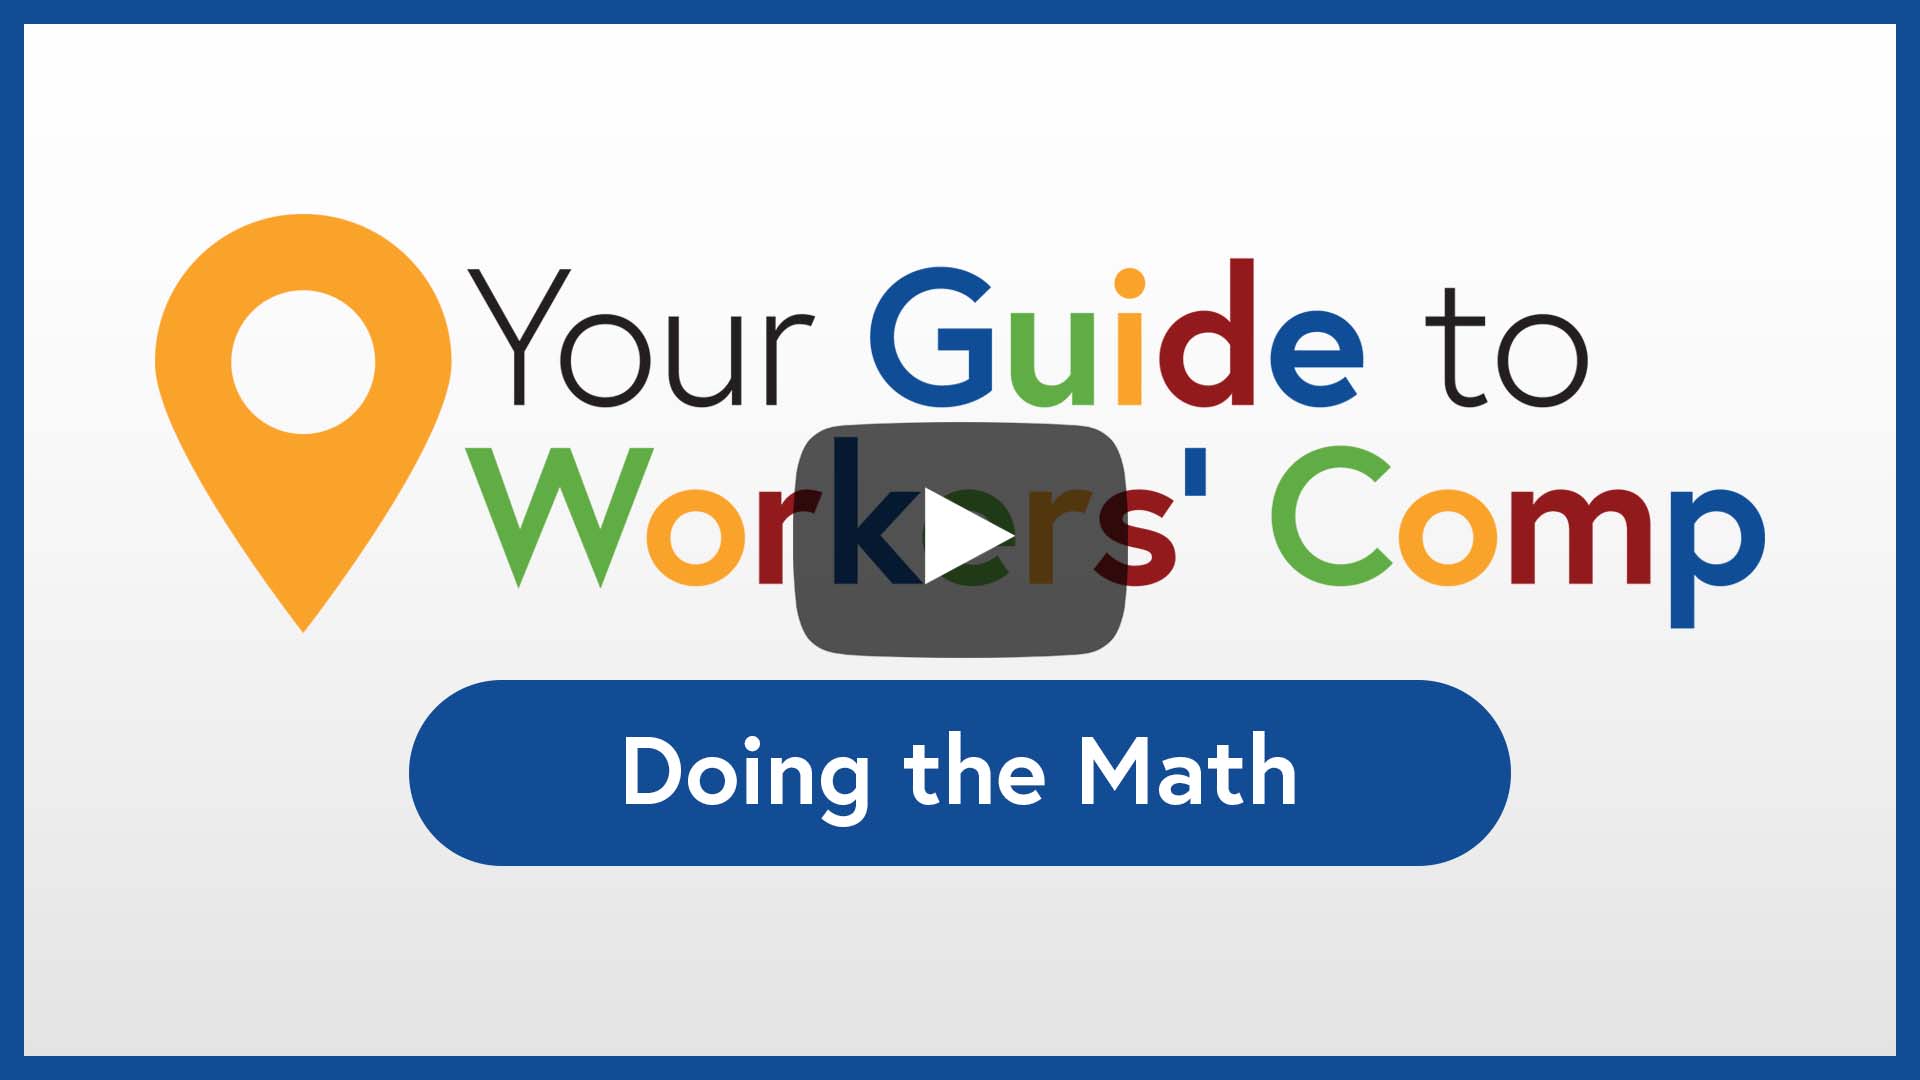 Your Guide to Workers' Comp - Doing the Math